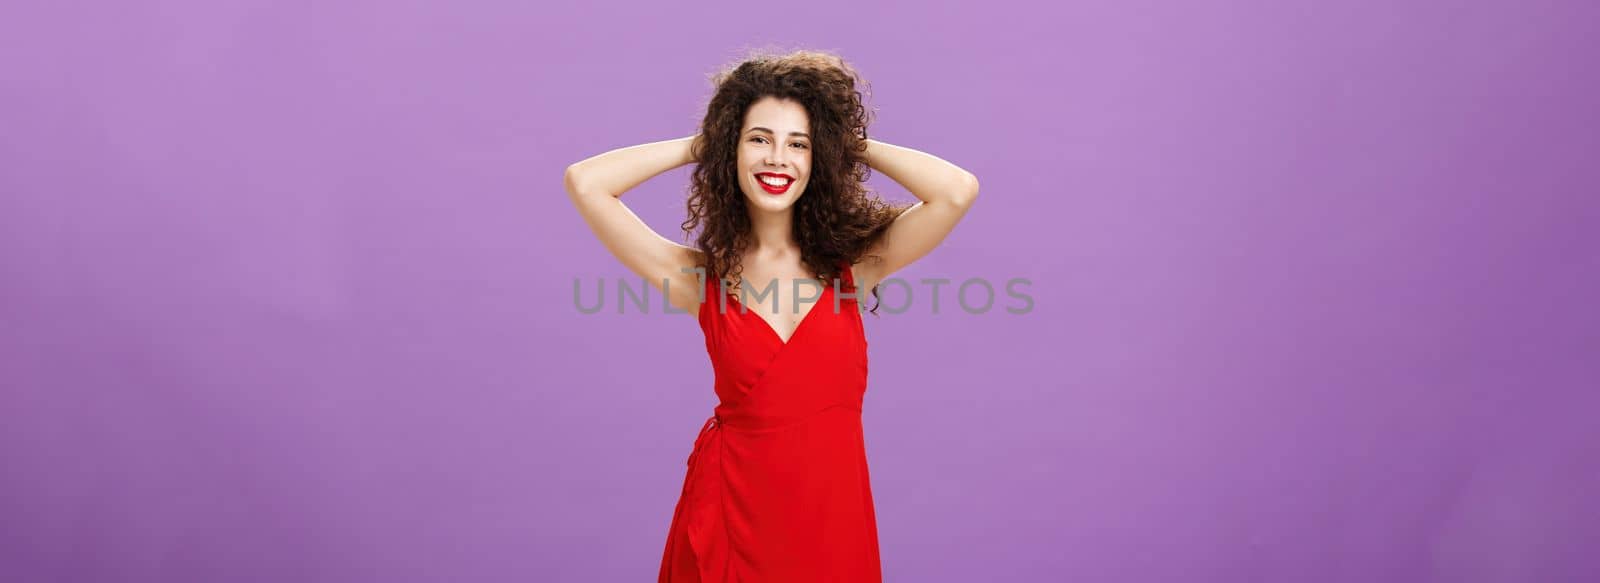 Feeling alive and energized like queen of show. Carefree elegant curly-haired woman in stylish red evening dress playing with hair and smiling broadly feeling beautiful in new outfit over purple wall.